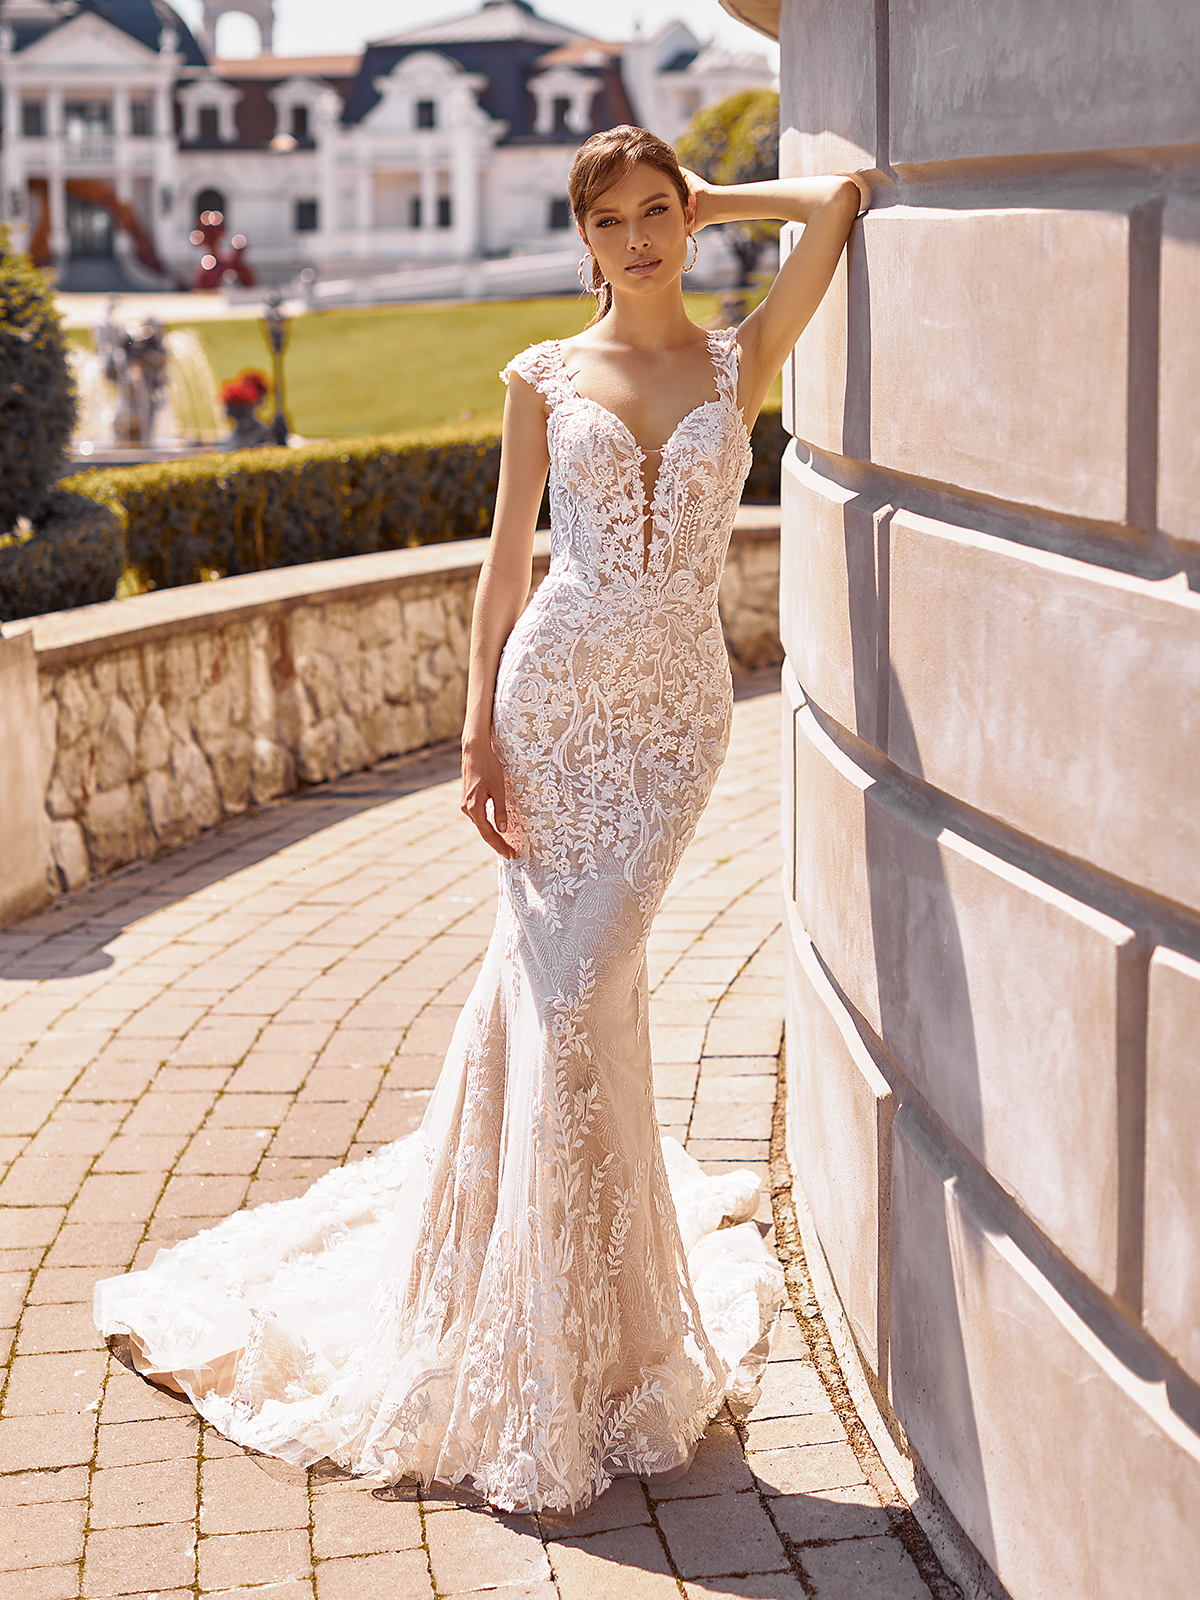 Woman standing outside of a building wearing a lace bridal gown with cap sleeves